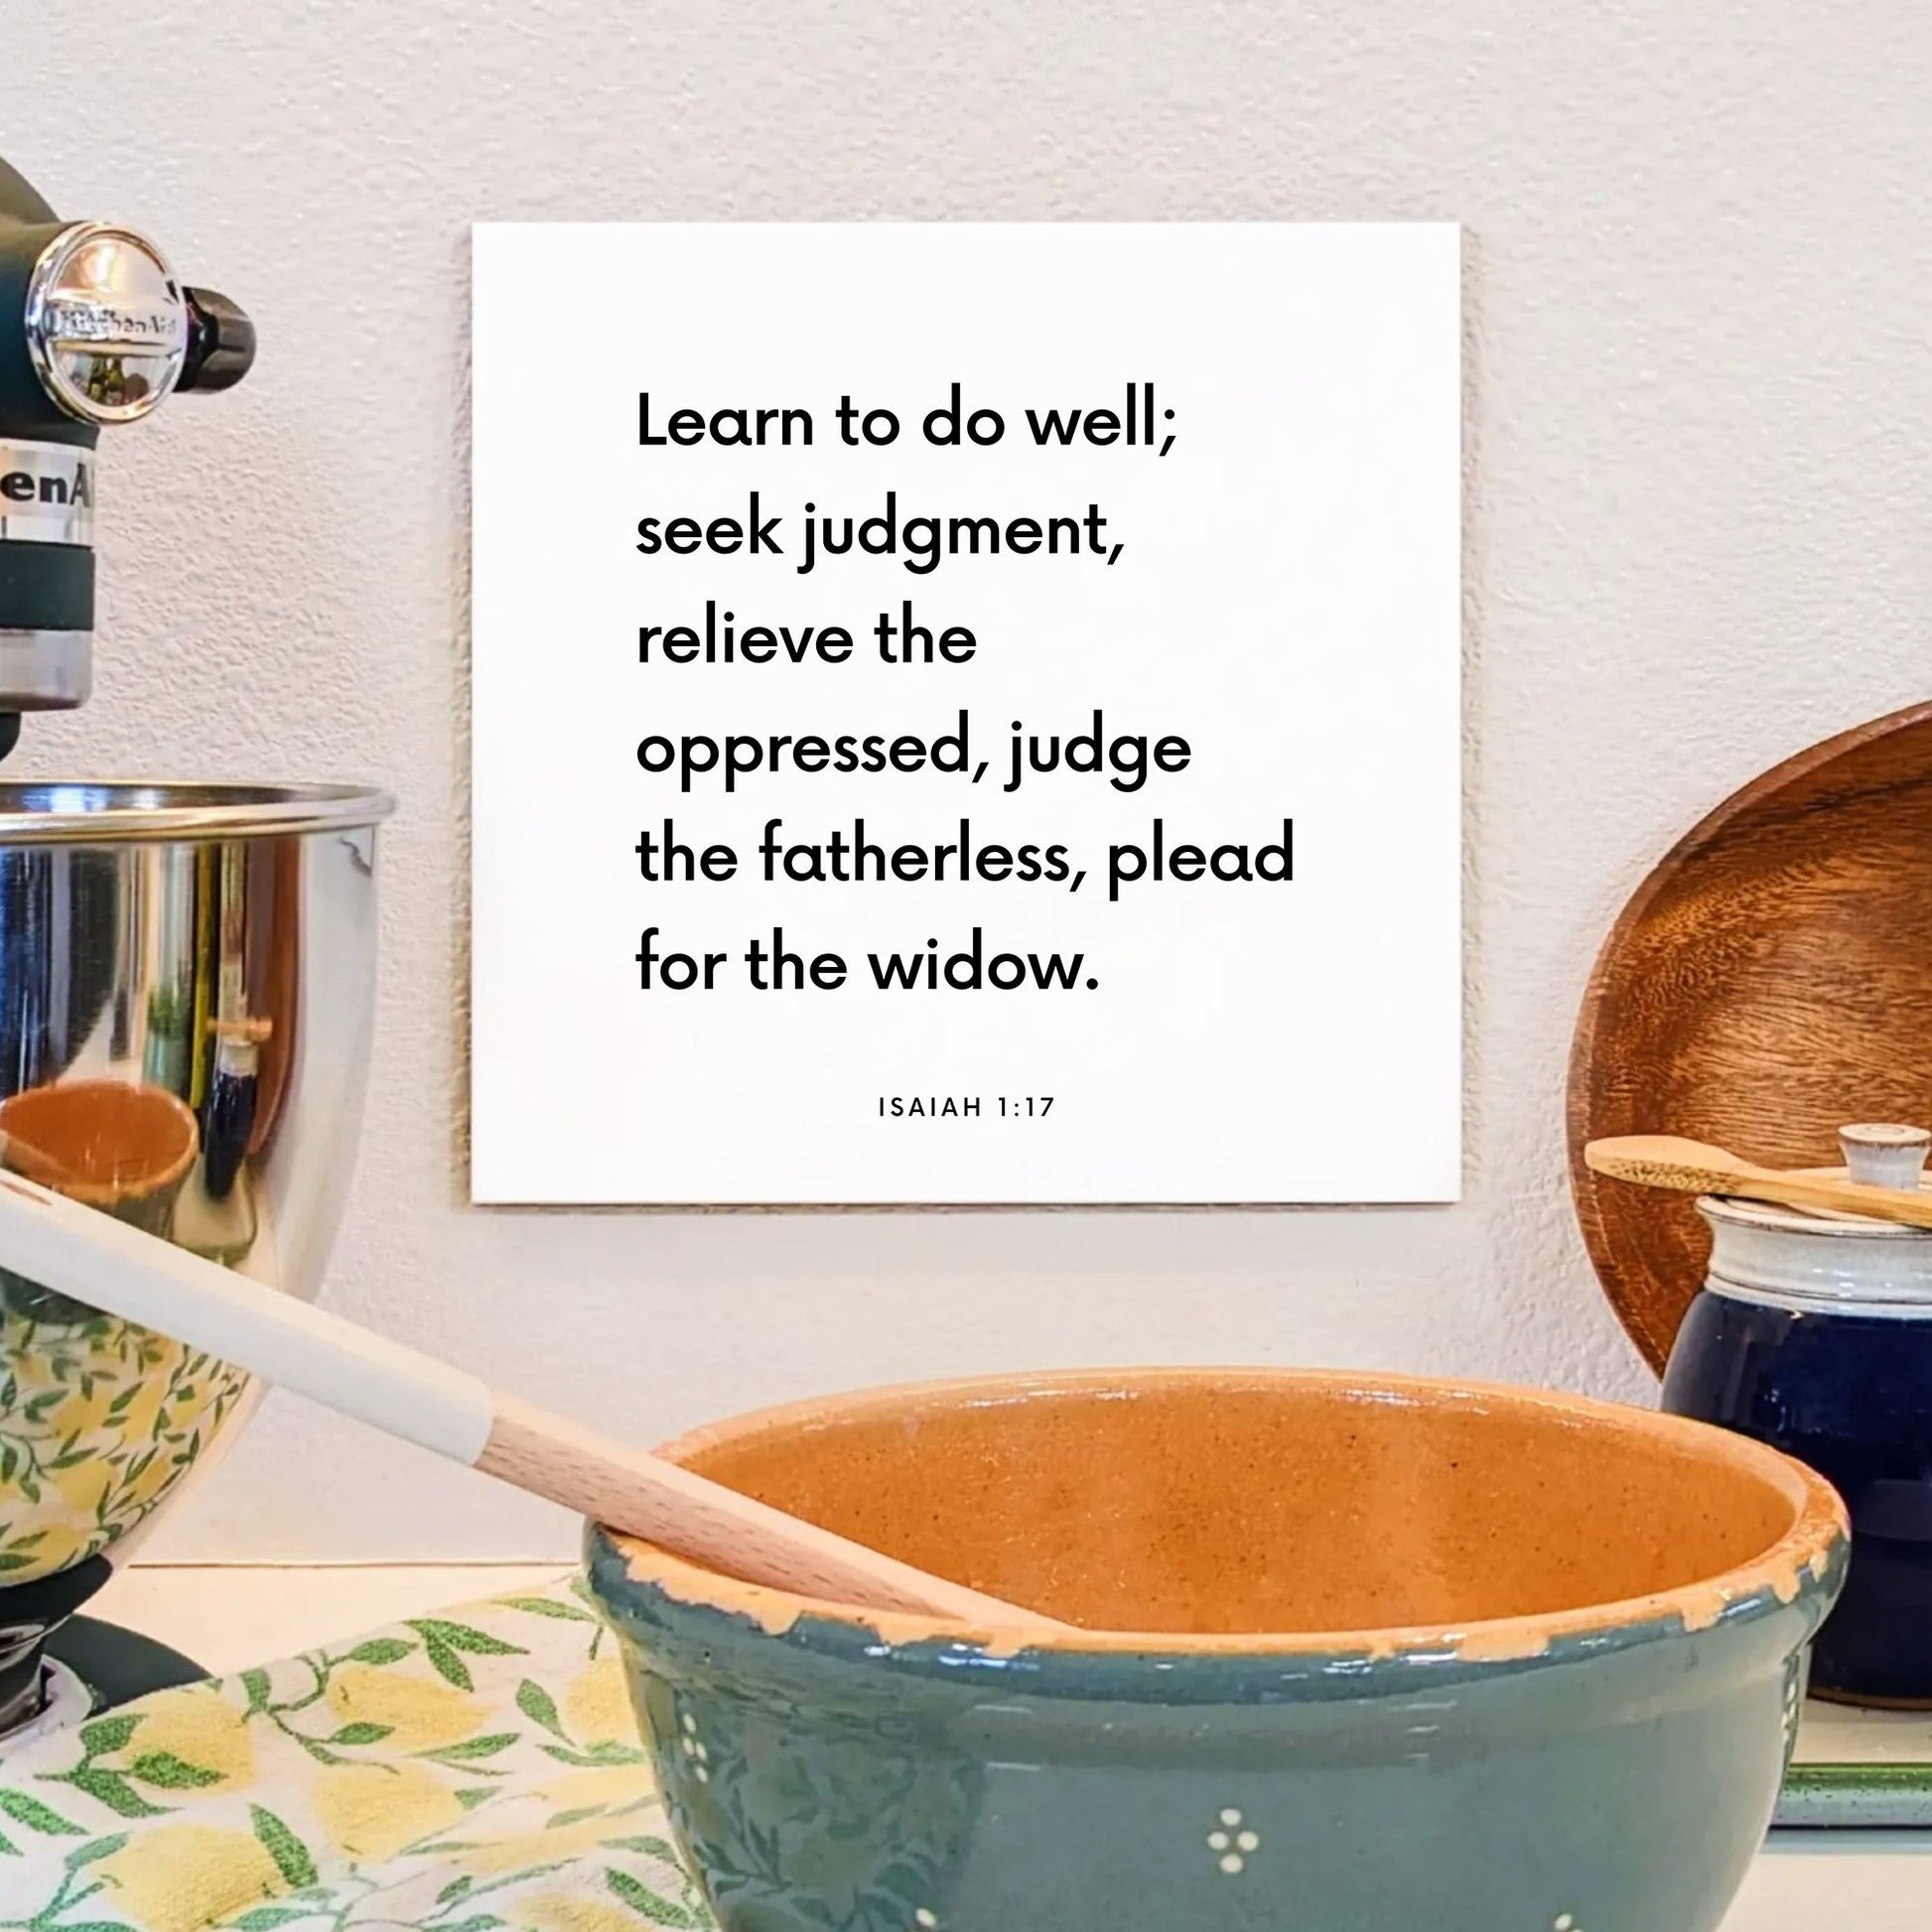 Kitchen mouting of the scripture tile for Isaiah 1:17 - "Learn to do well; seek judgment, relieve the oppressed"